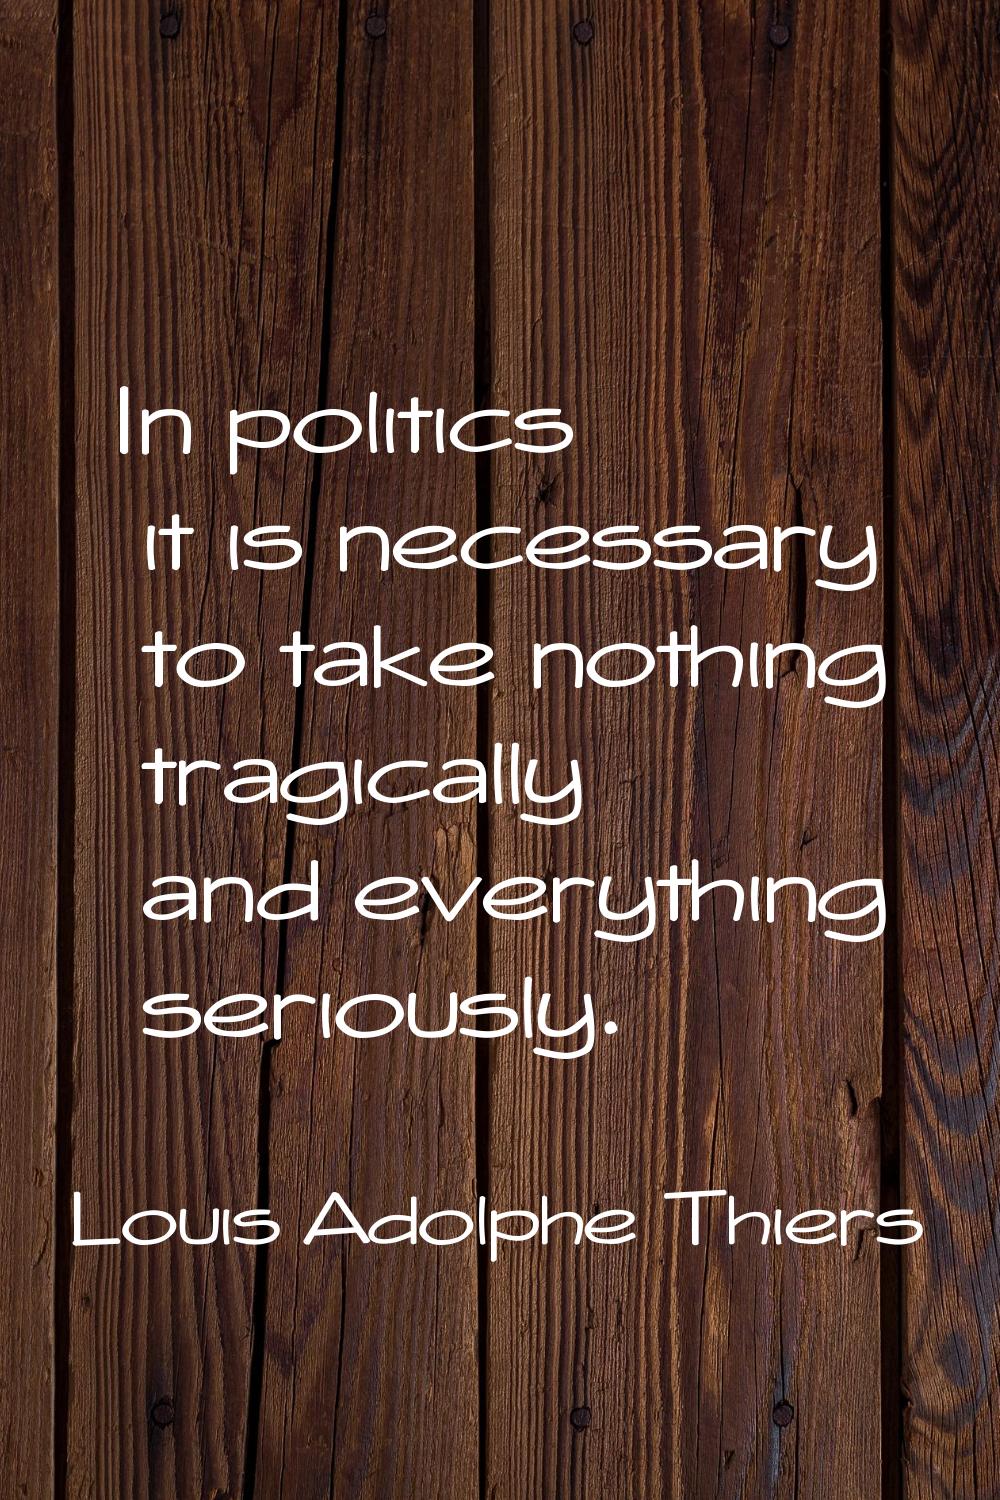 In politics it is necessary to take nothing tragically and everything seriously.